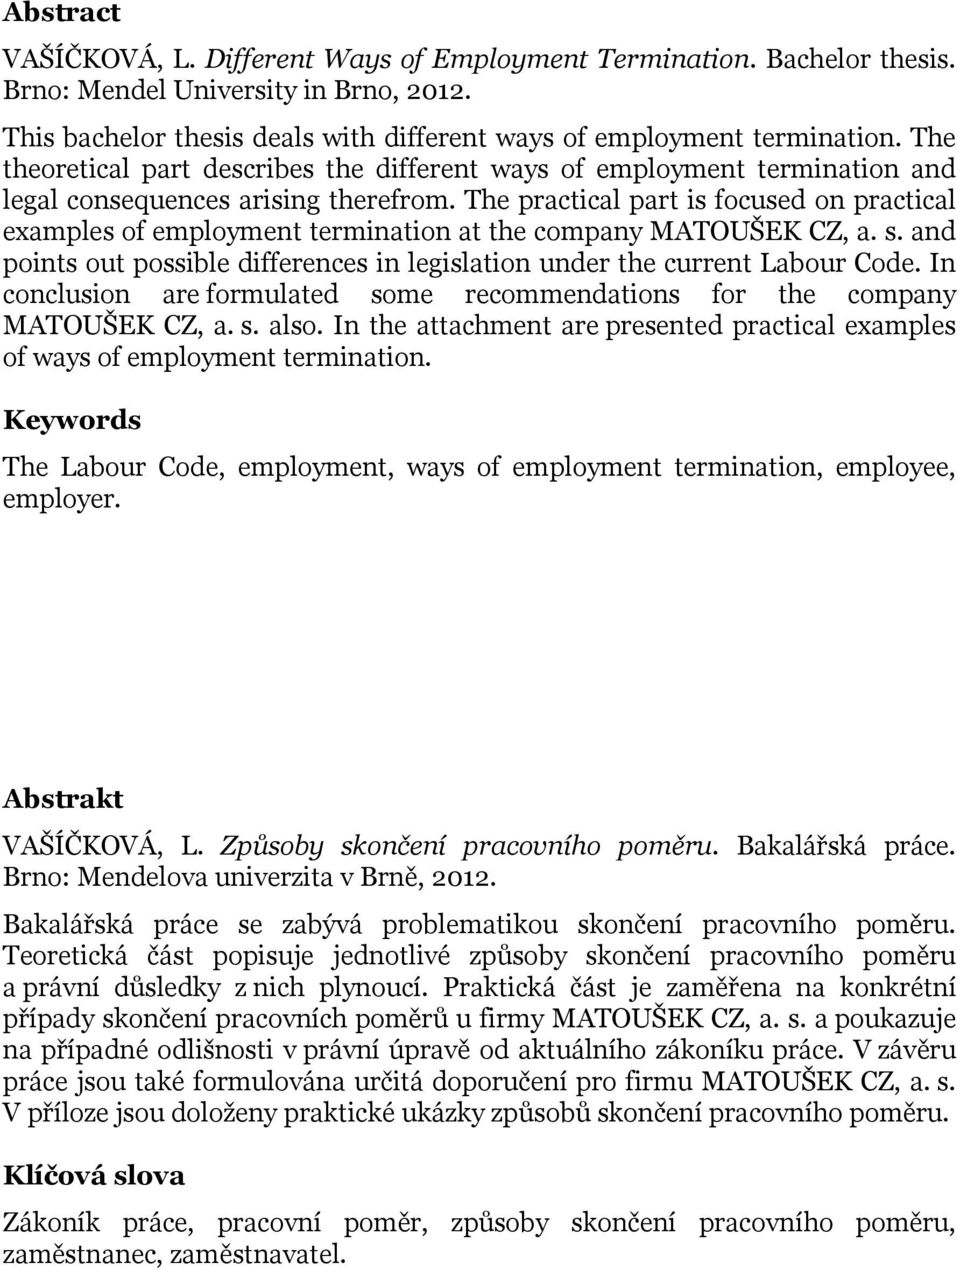 The practical part is focused on practical examples of employment termination at the company MATOUŠEK CZ, a. s. and points out possible differences in legislation under the current Labour Code.